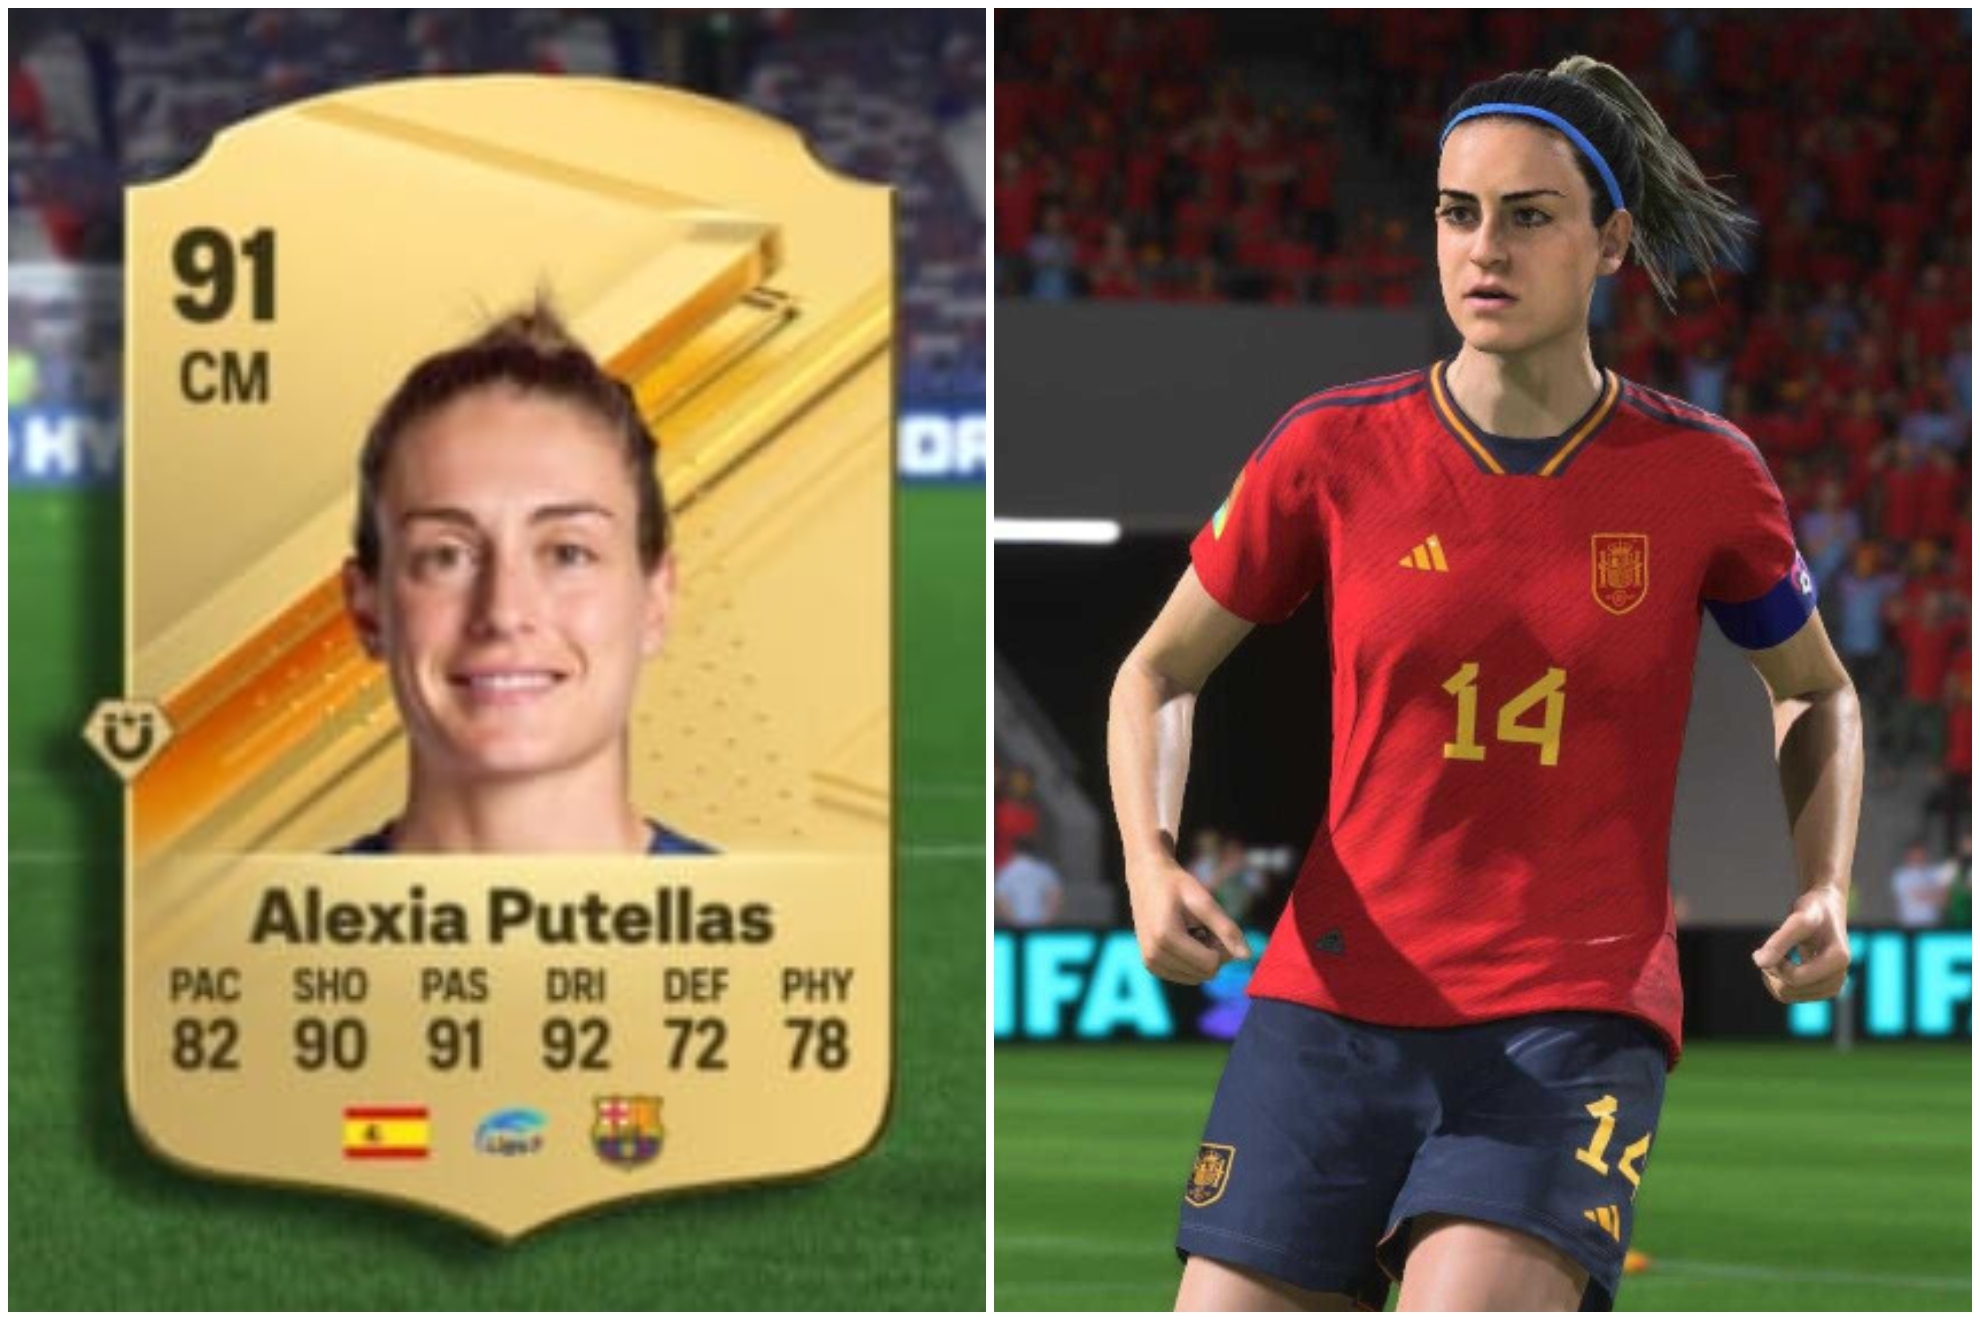 Alexia Putellas, the player with the best in-game stats in EA Sports FC 24 ahead of Griezmann and De Bruyne